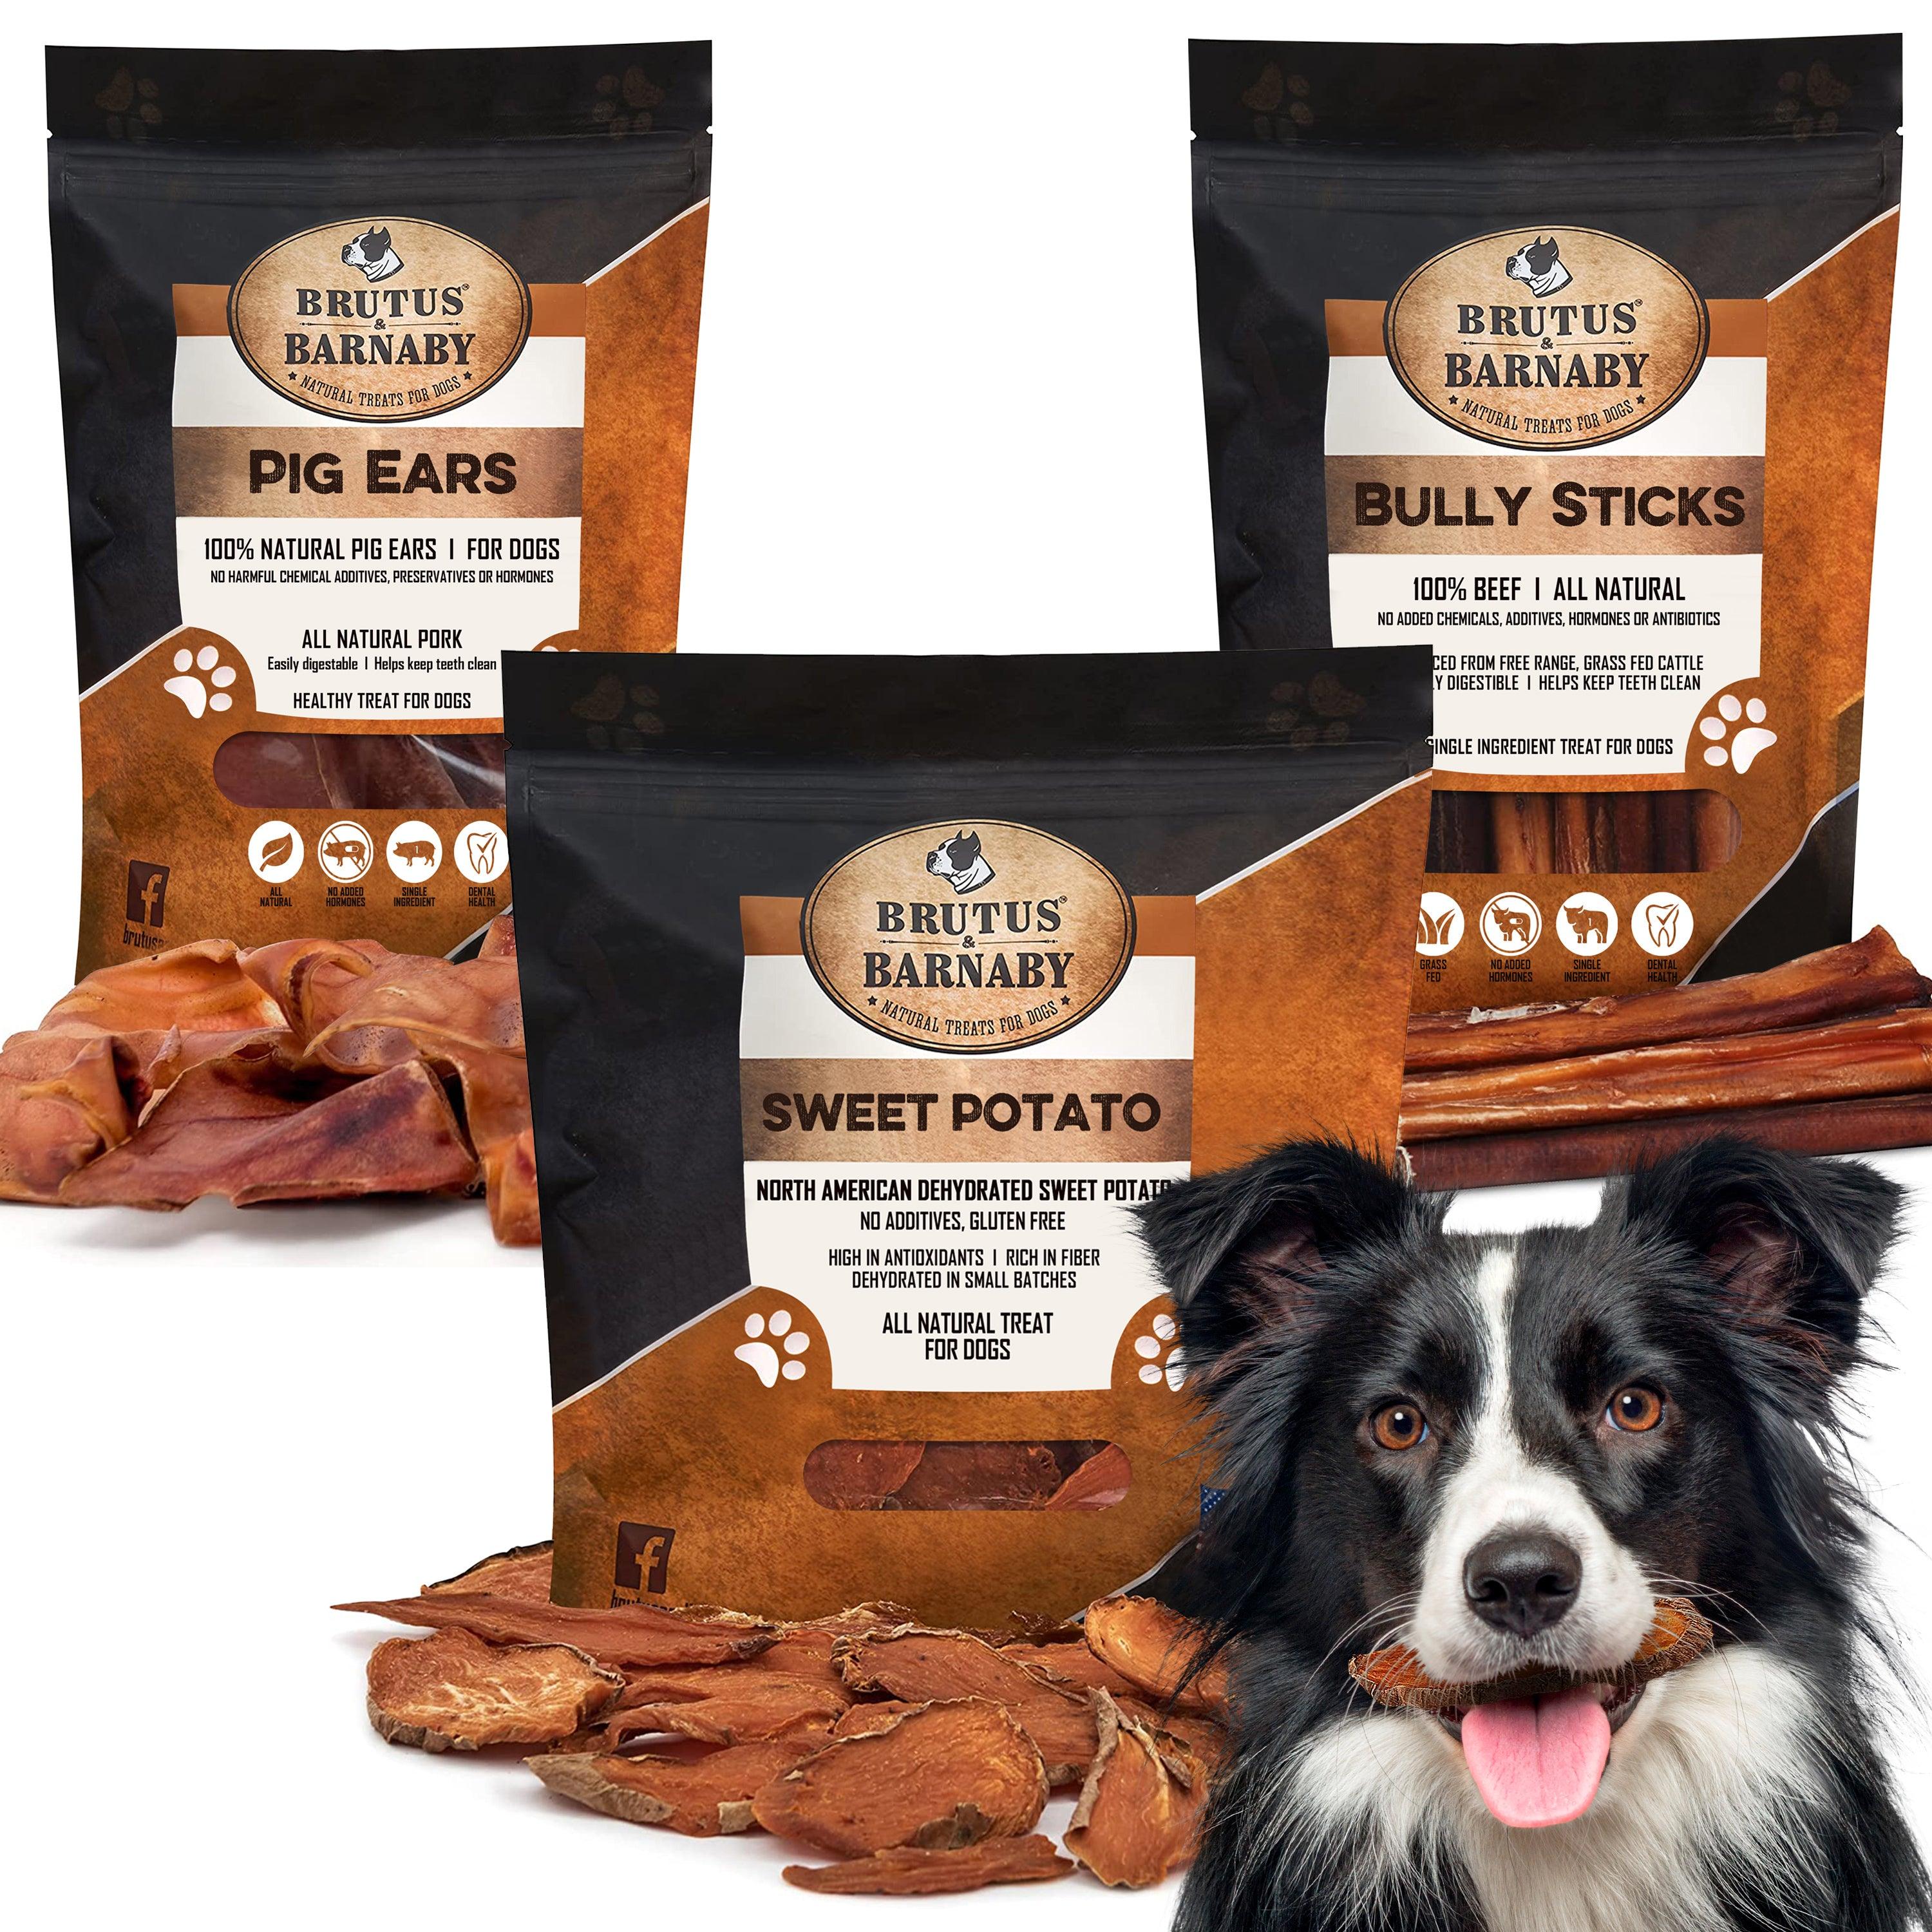 12 Pig Ears, 12 Bully Sticks, Sweet Potato Treats (14oz) - with no Added Colorings, Chemicals or Hormones - Brutus & Barnaby